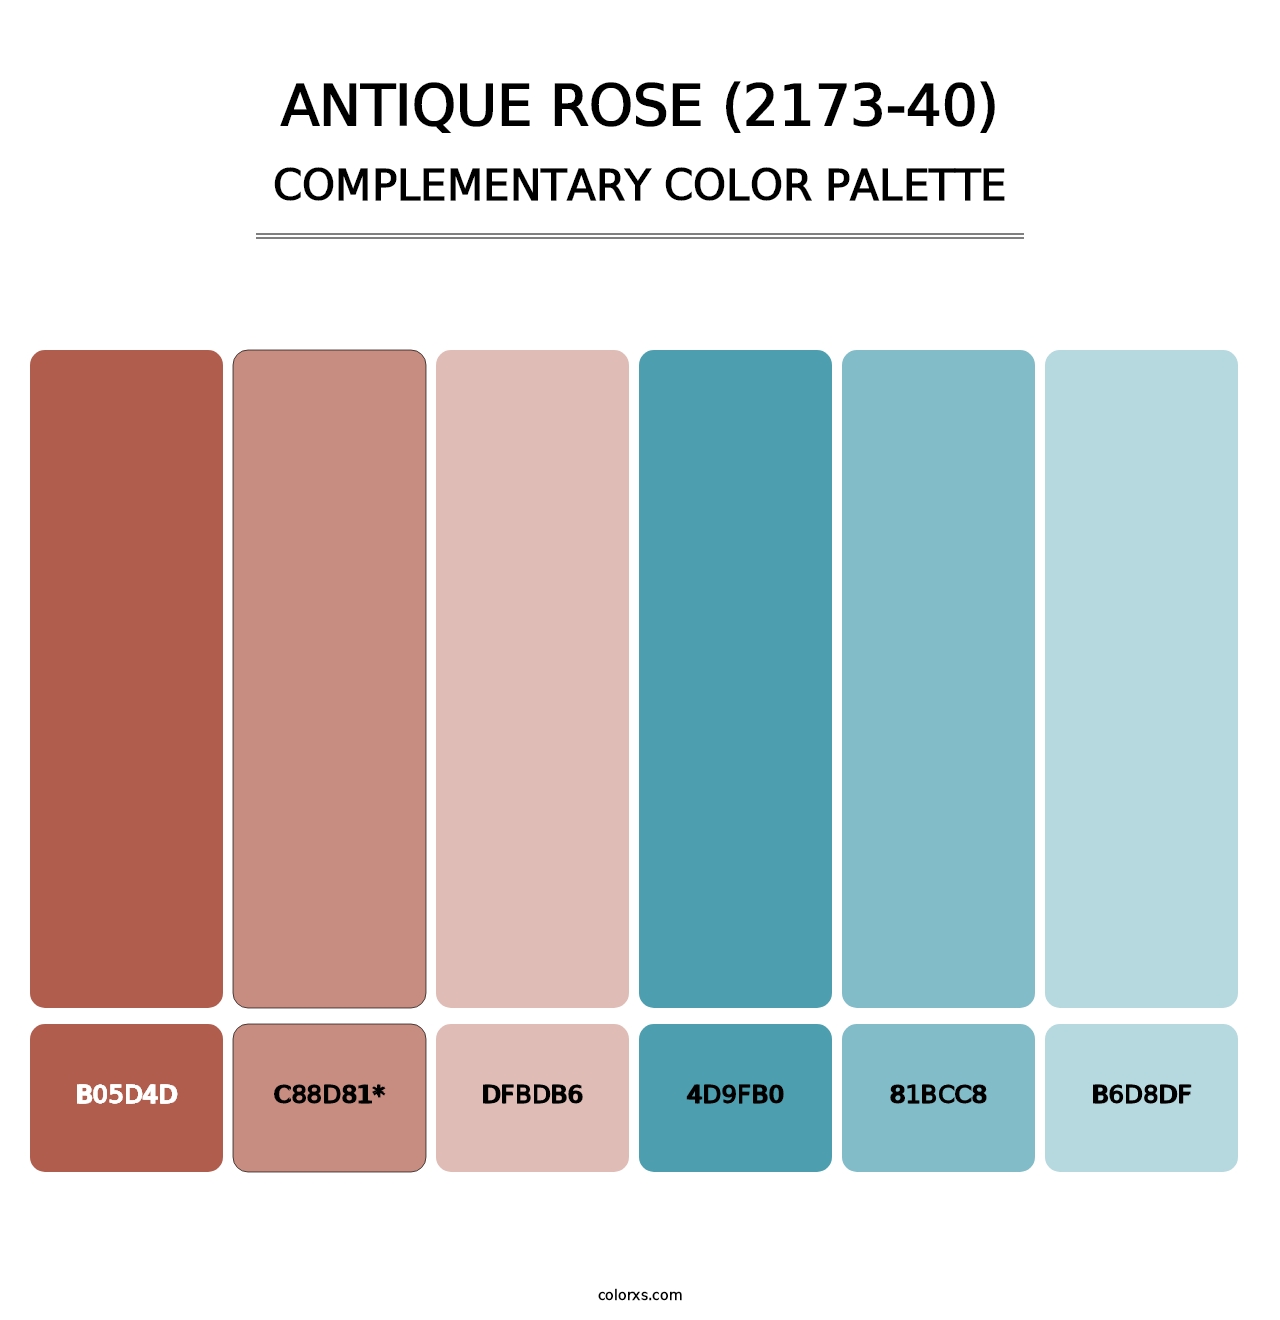 Antique Rose (2173-40) - Complementary Color Palette